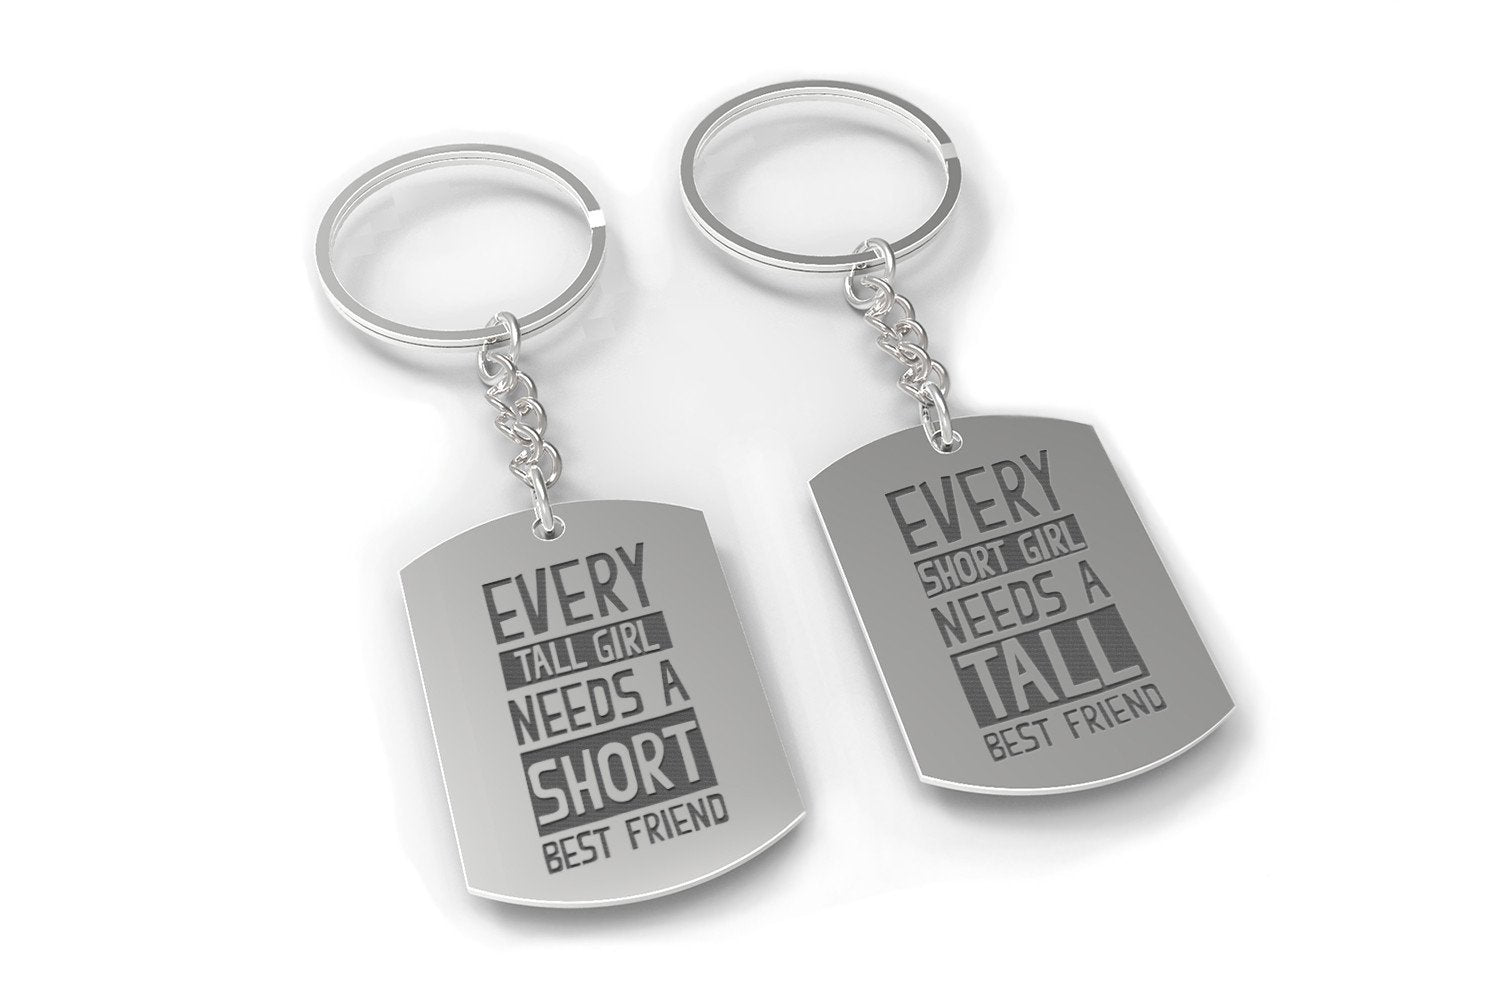 Short Tall Funny Matching BFF Key Chain for Best Friends Great Gift